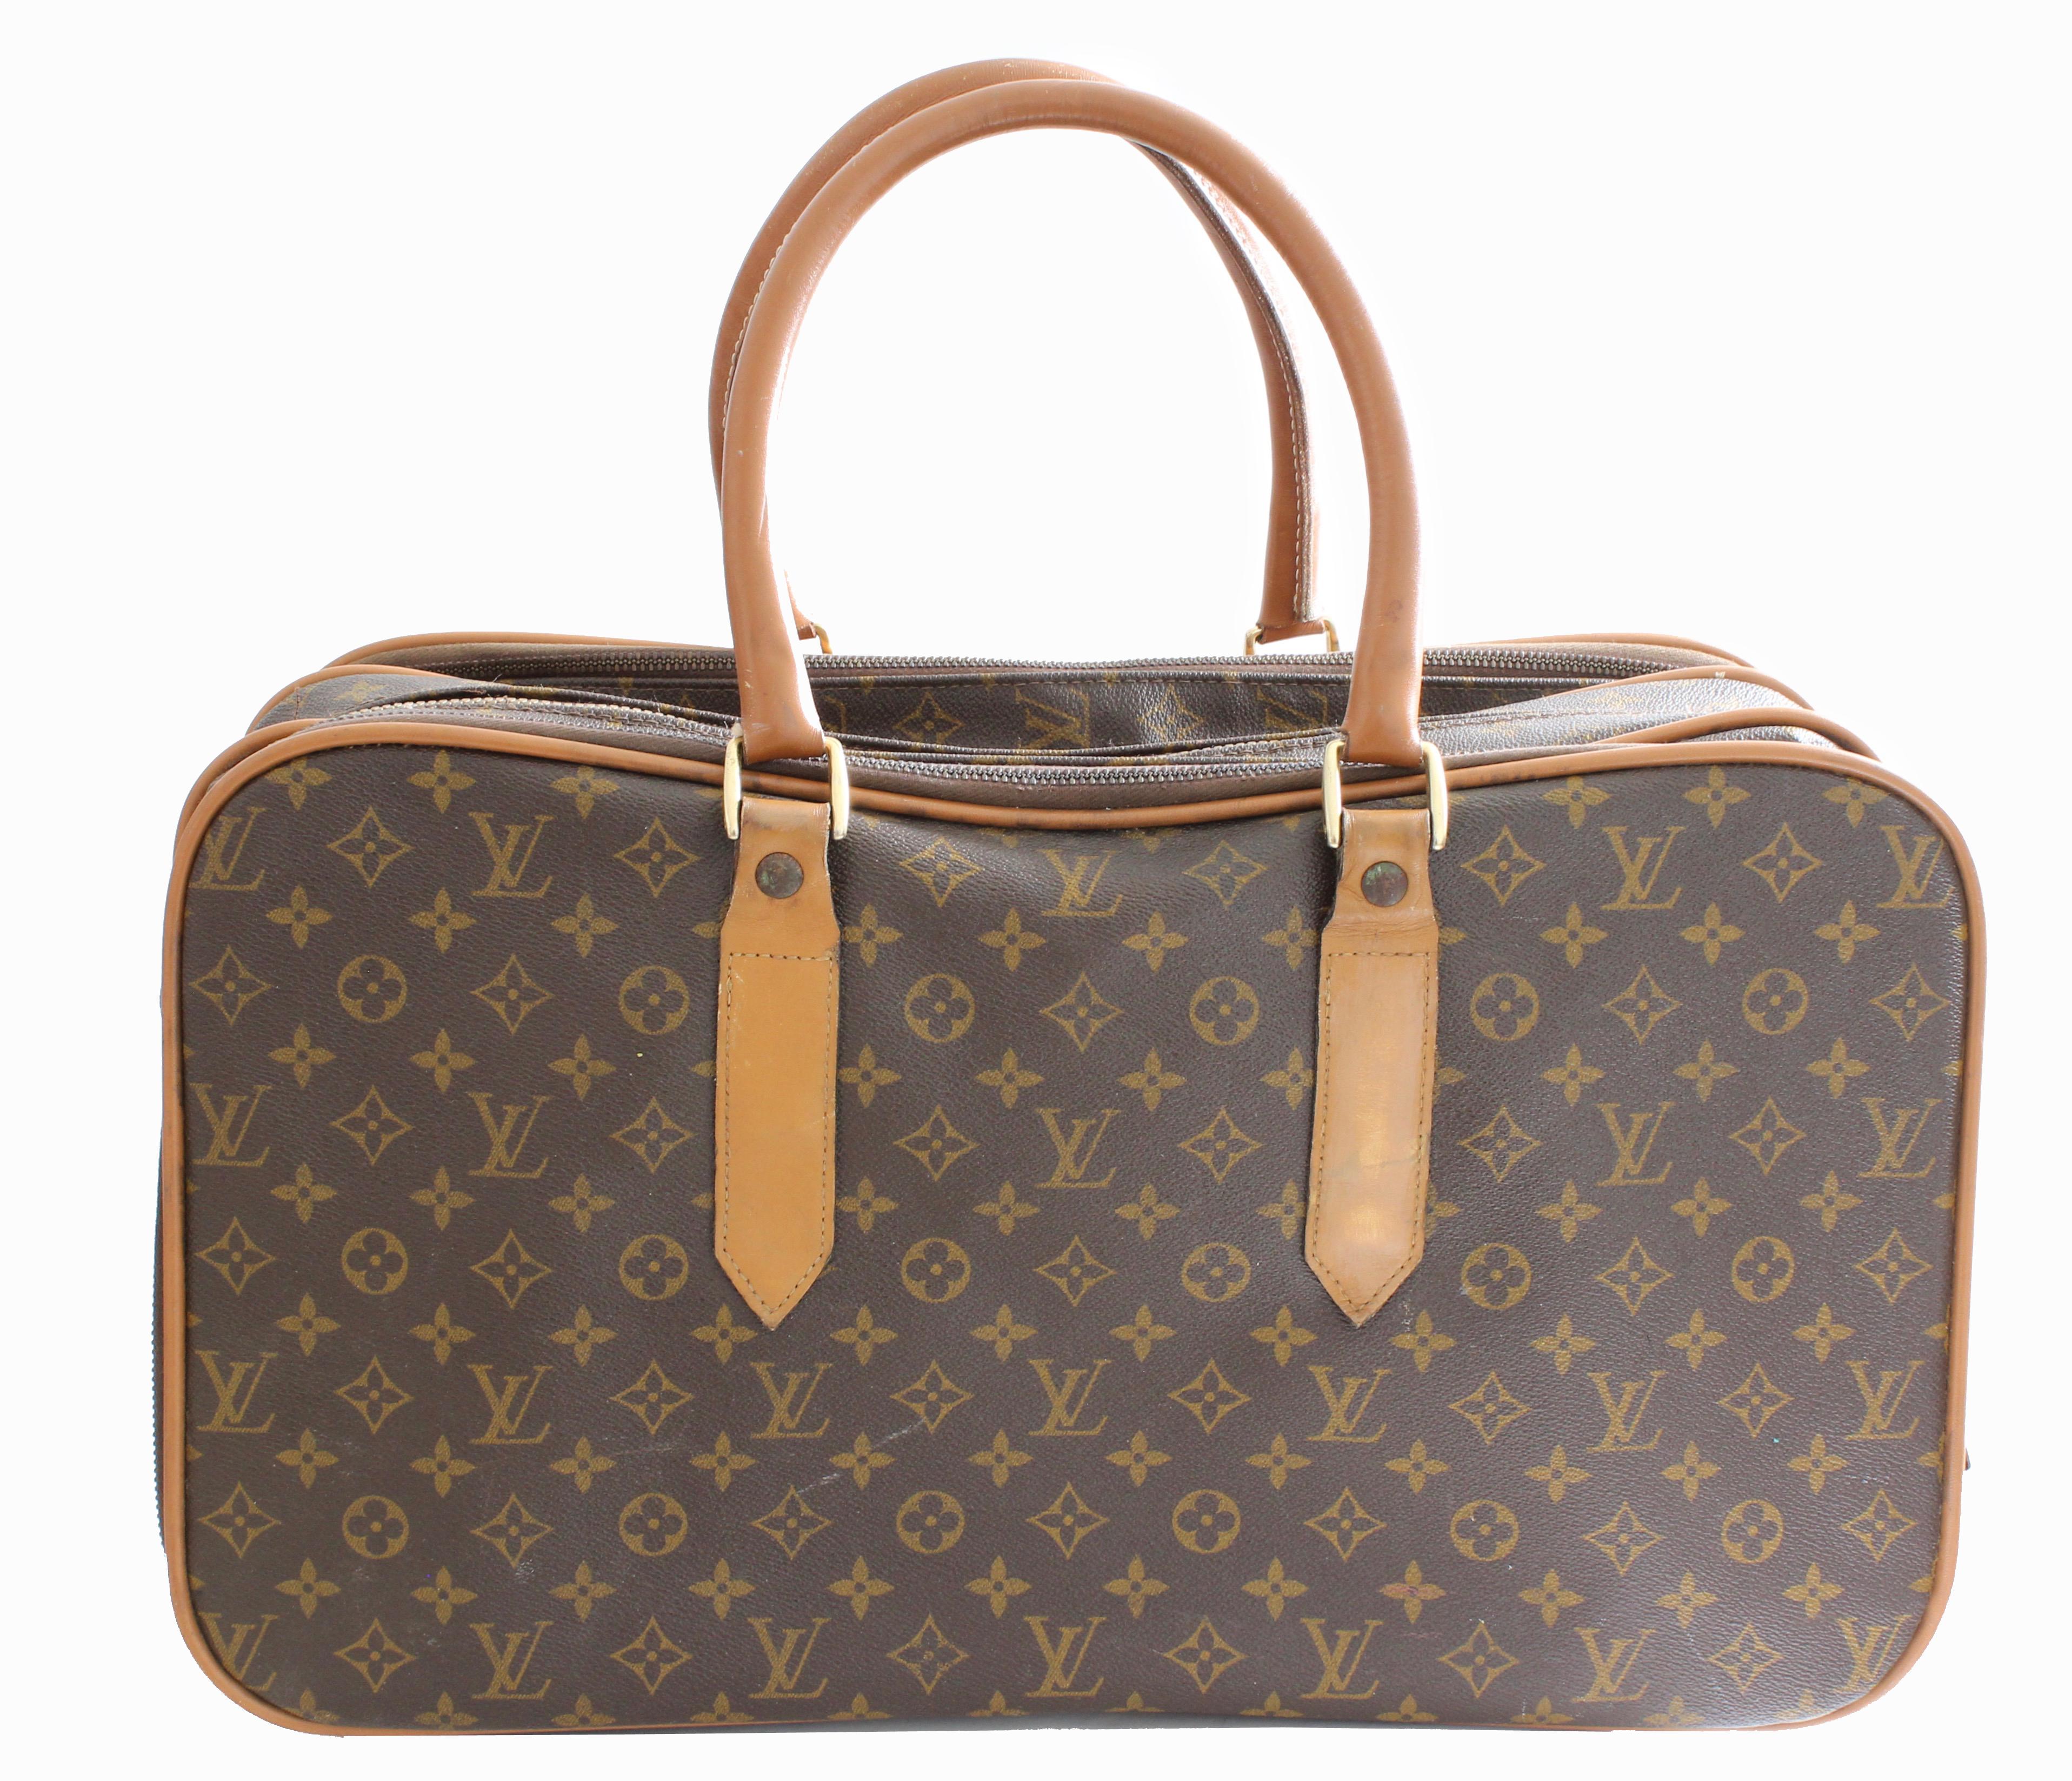 Brown Louis Vuitton Soft Sided Suitcase Luggage Monogram Weekender Carry All Bag Saks 